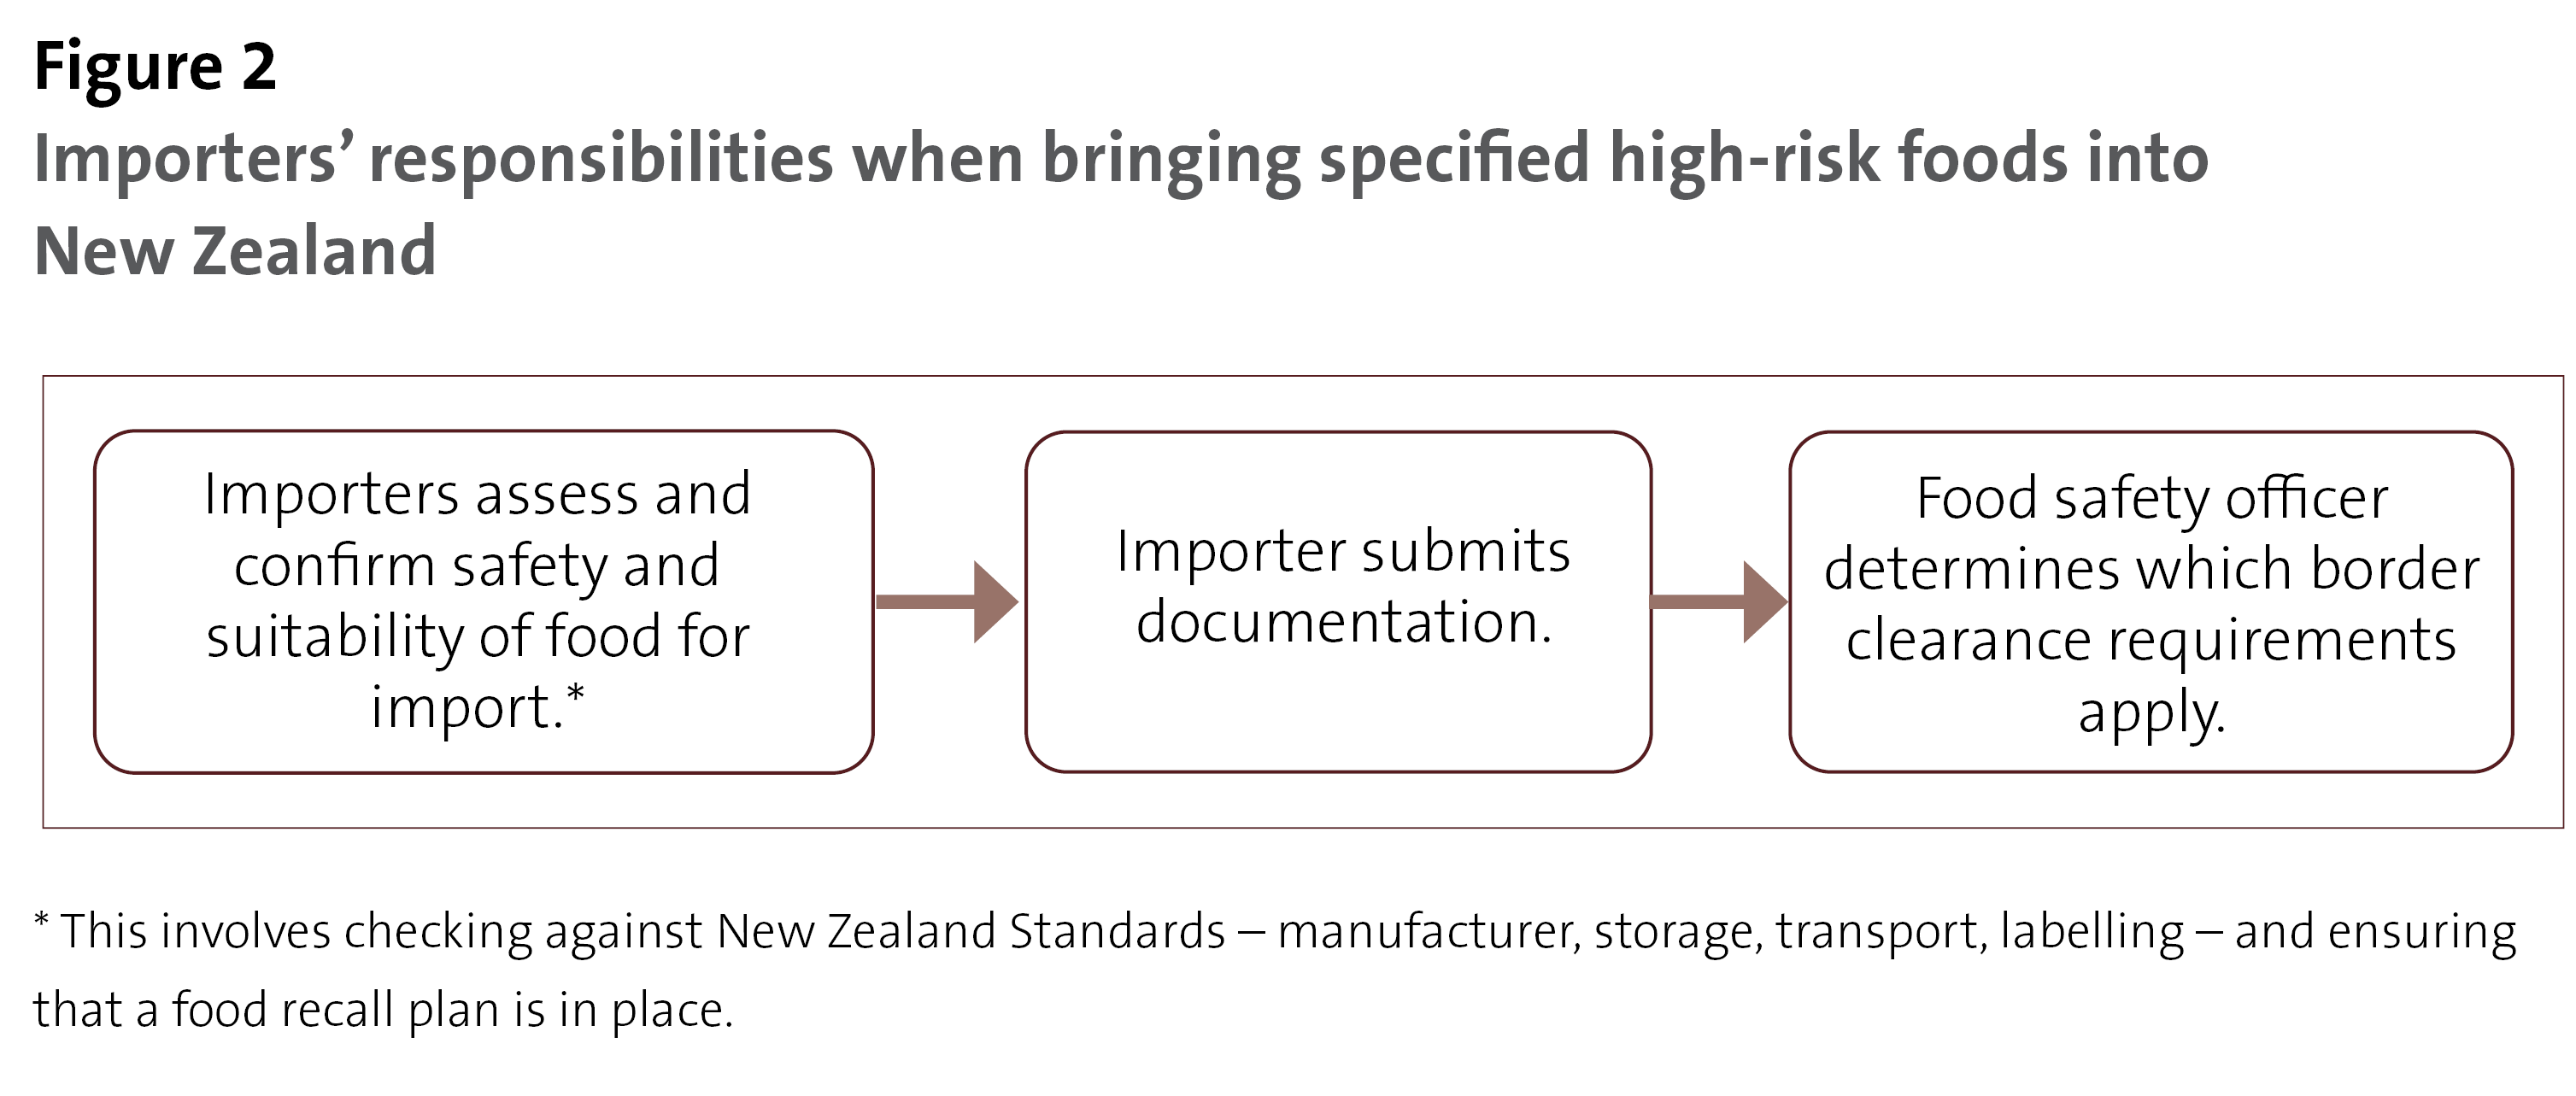 Figure 2: Importers’ responsibilities when bringing specified high-risk foods into New Zealand